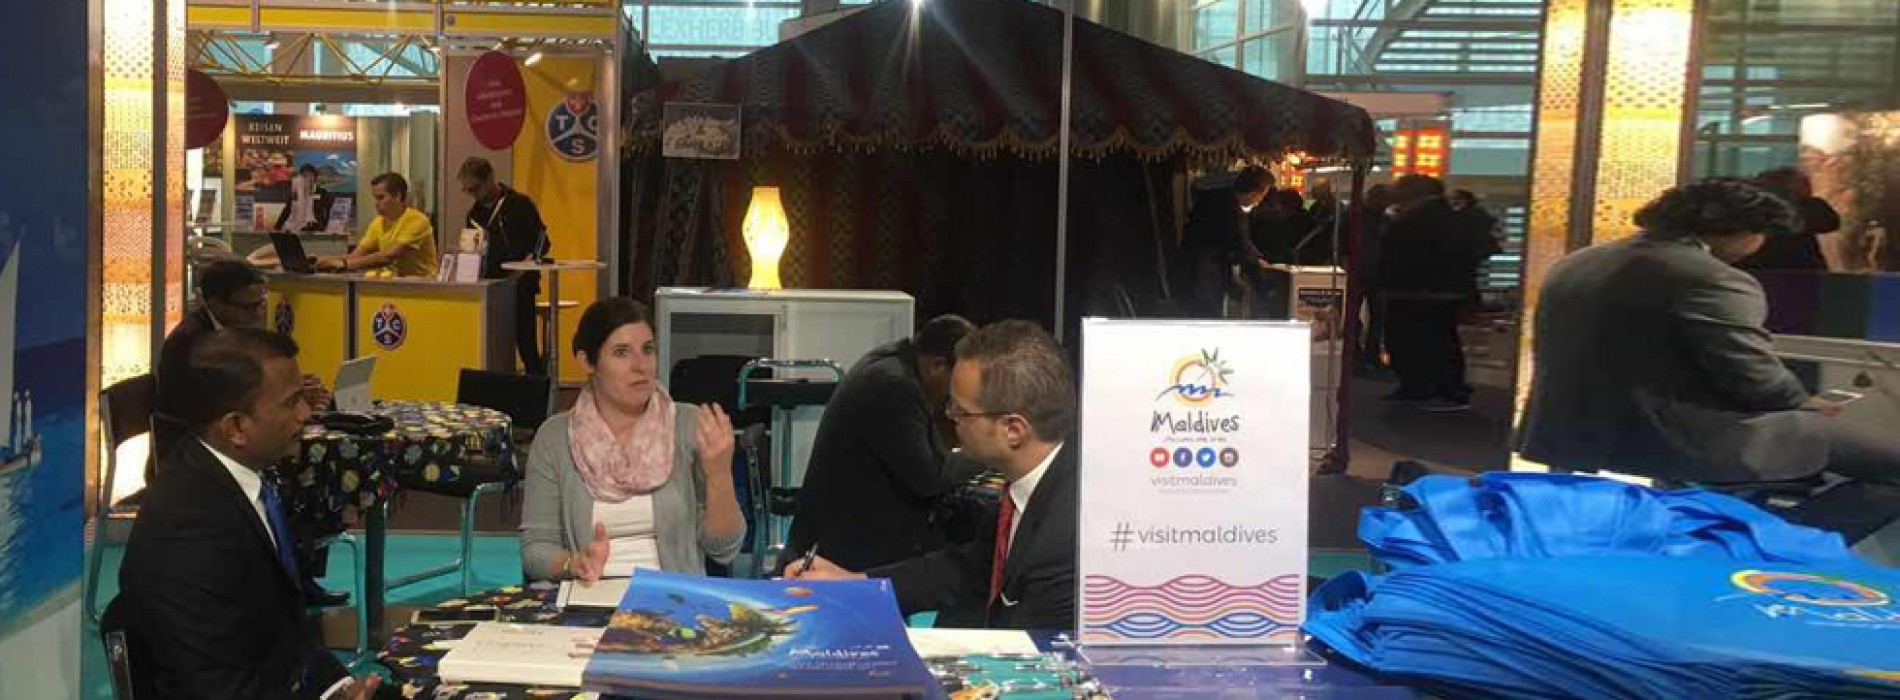 Maldives Shines at the largest Swiss Holiday & Travel Fair – FESPO